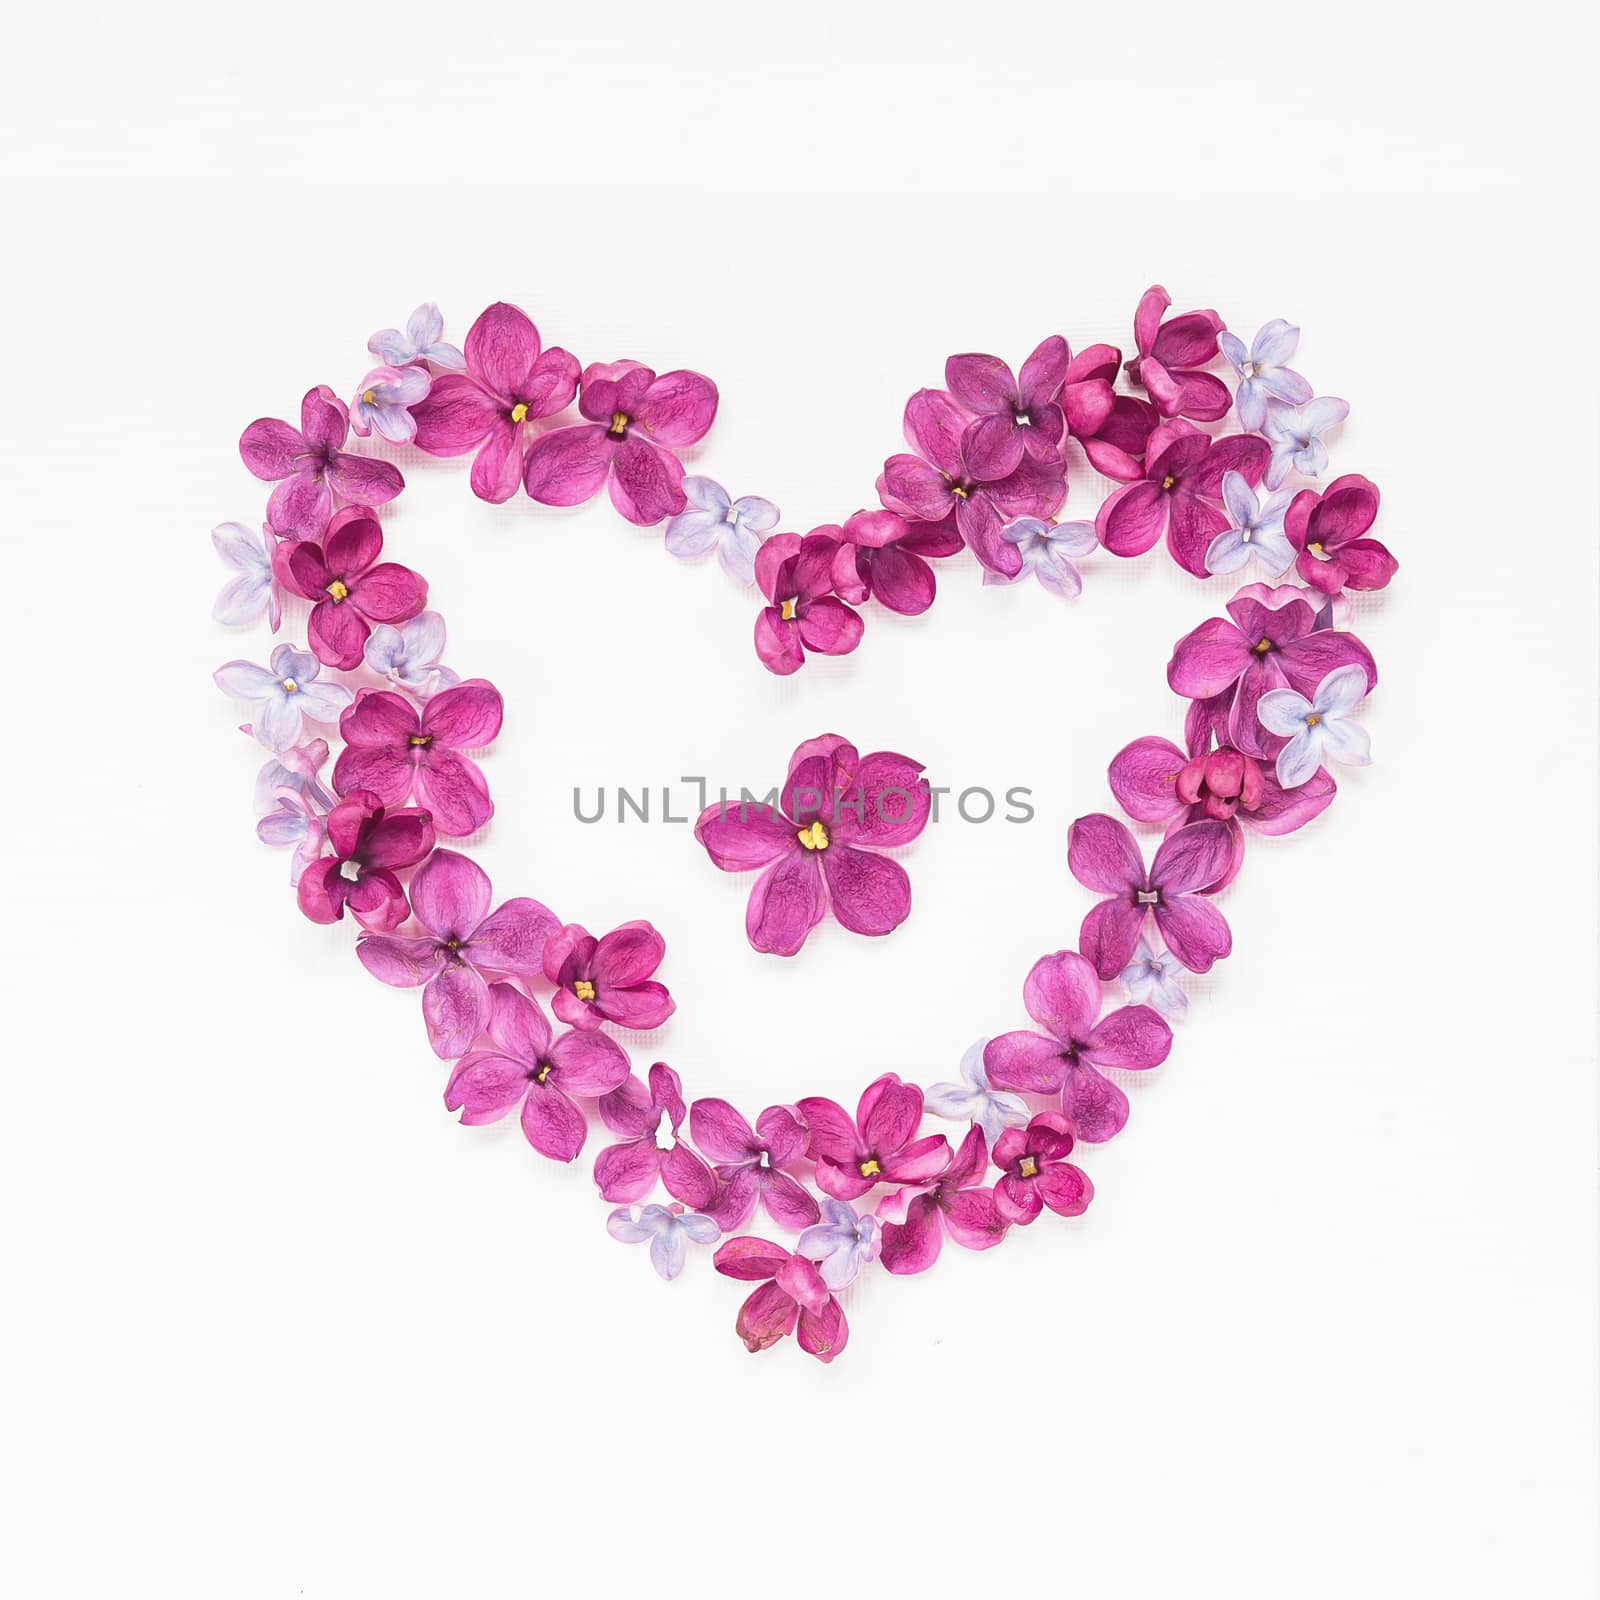 Heart made of lilac petals. Greeting card with heart and five-pointed lilac flower. Copy space, mock up